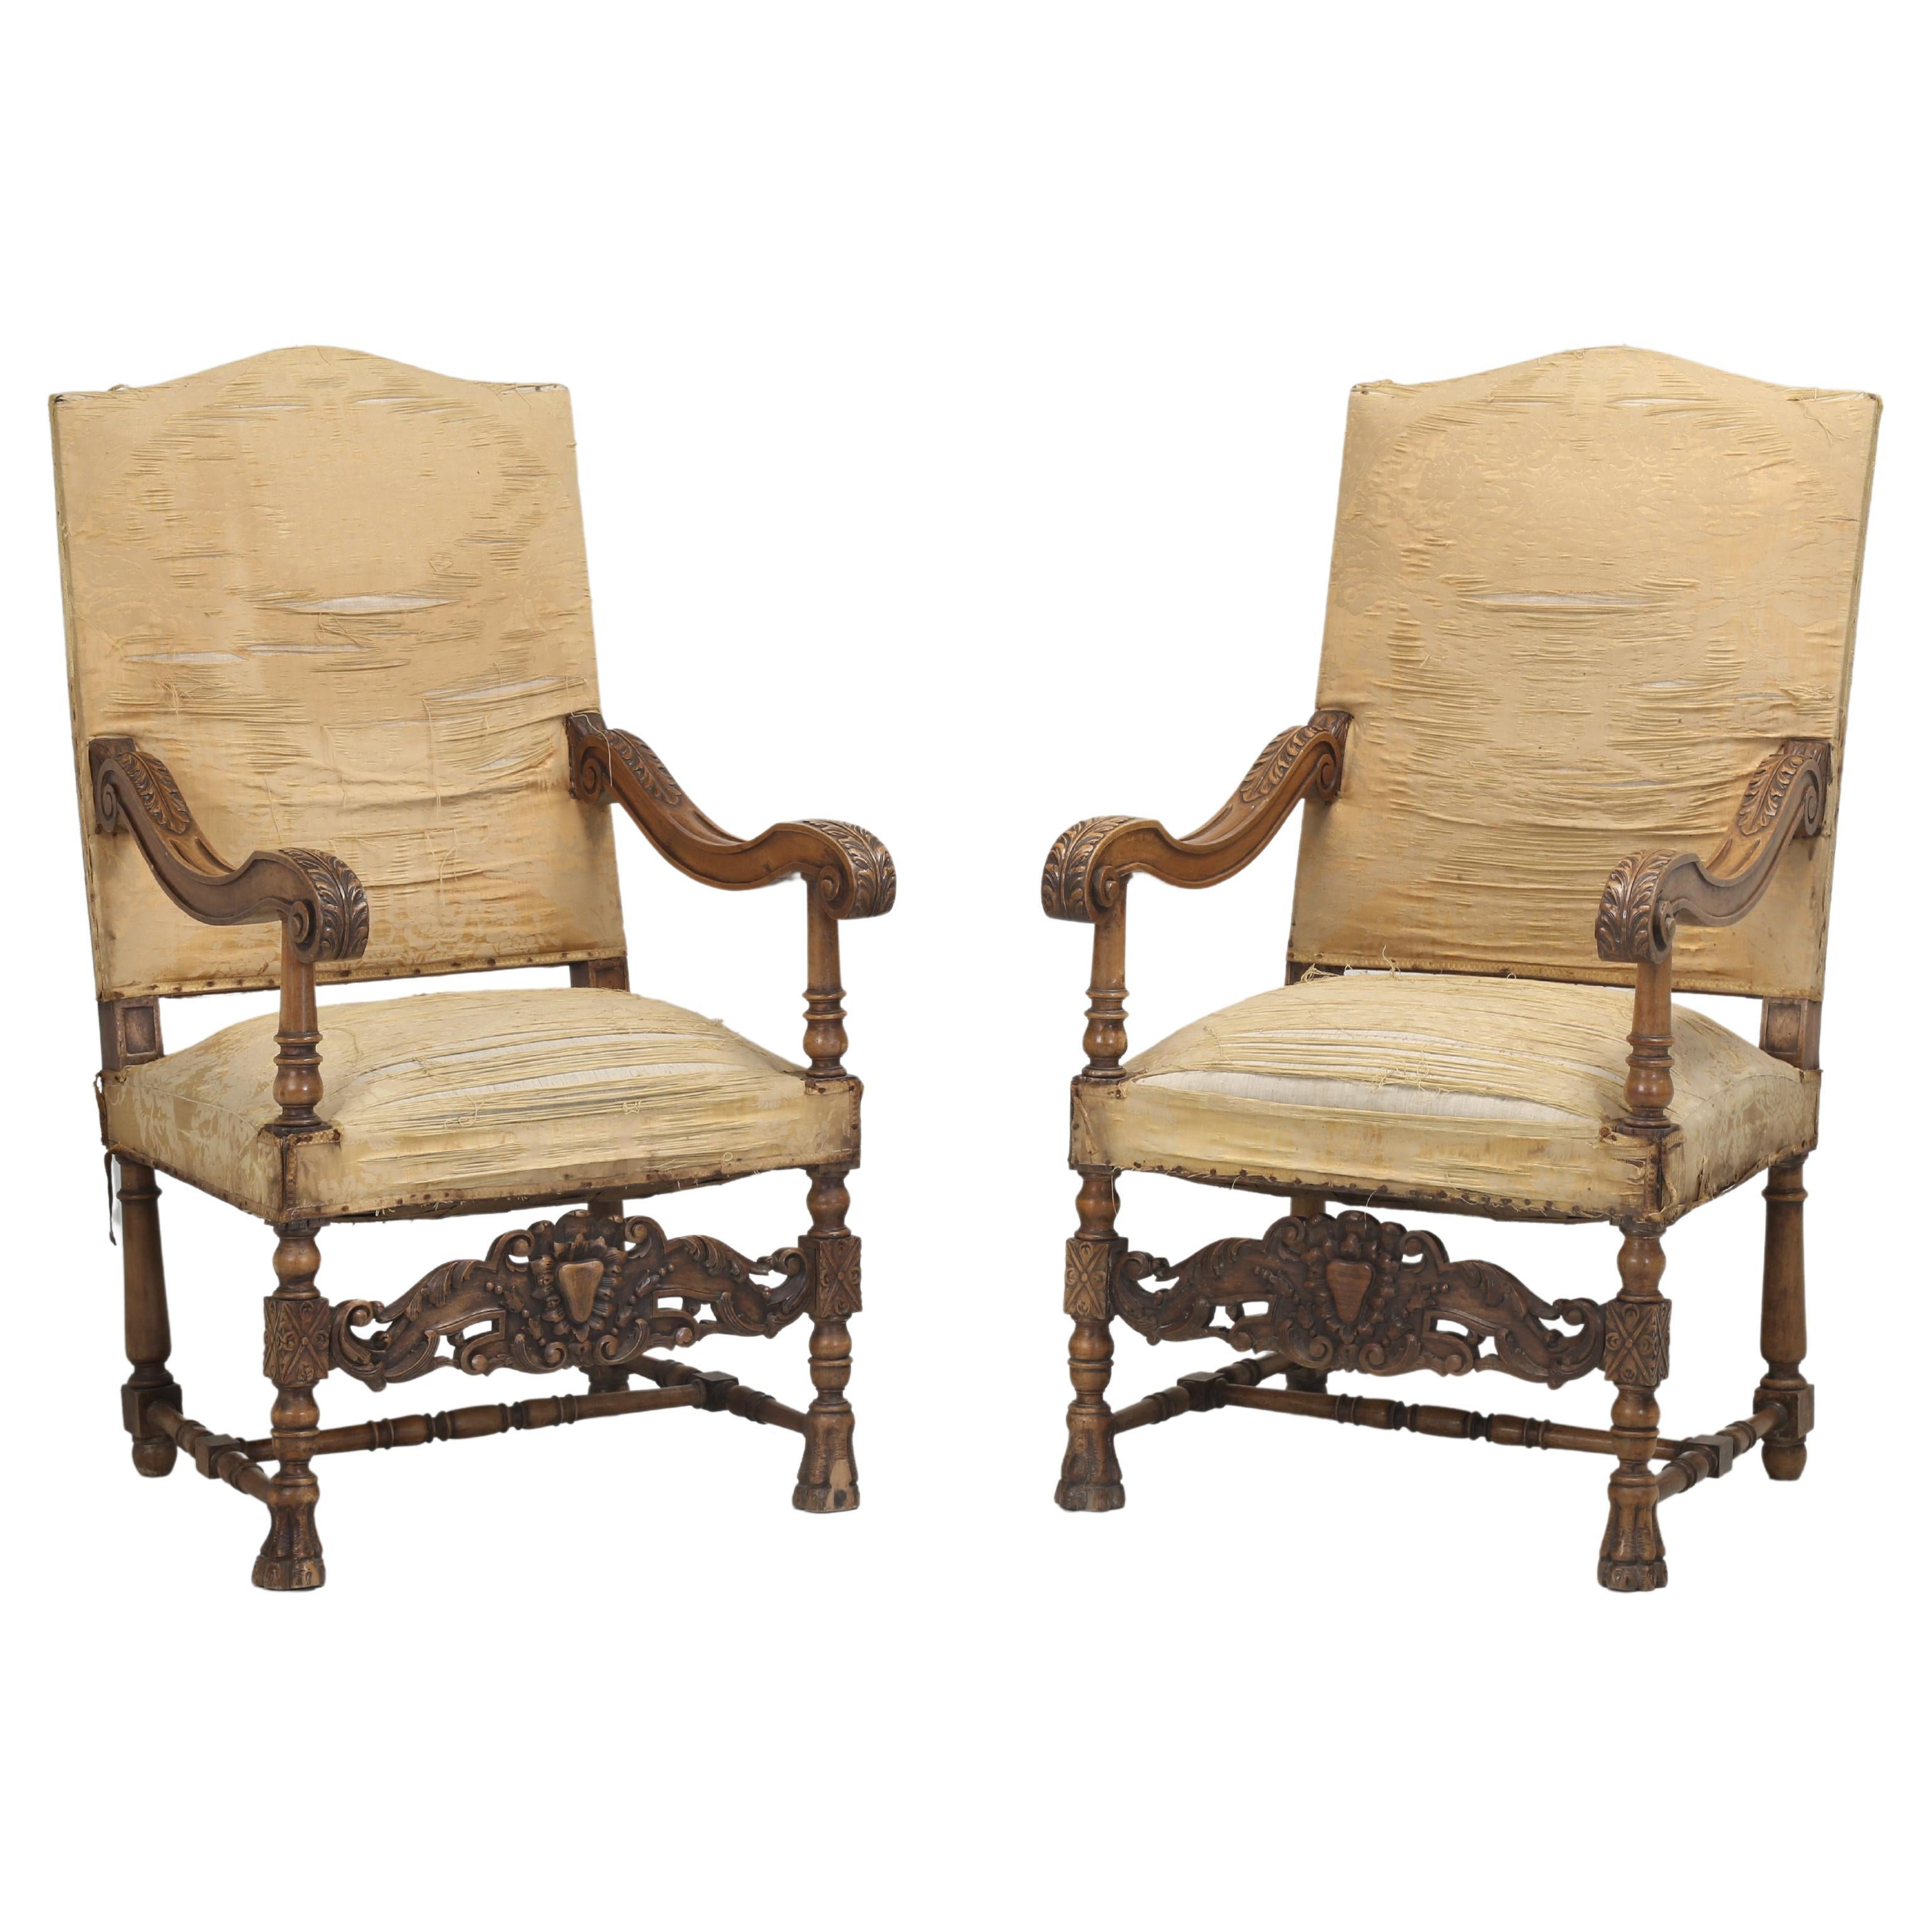 Antique Pair of Italian Armchairs Hand Carved Walnut Require Restoration C1880s For Sale